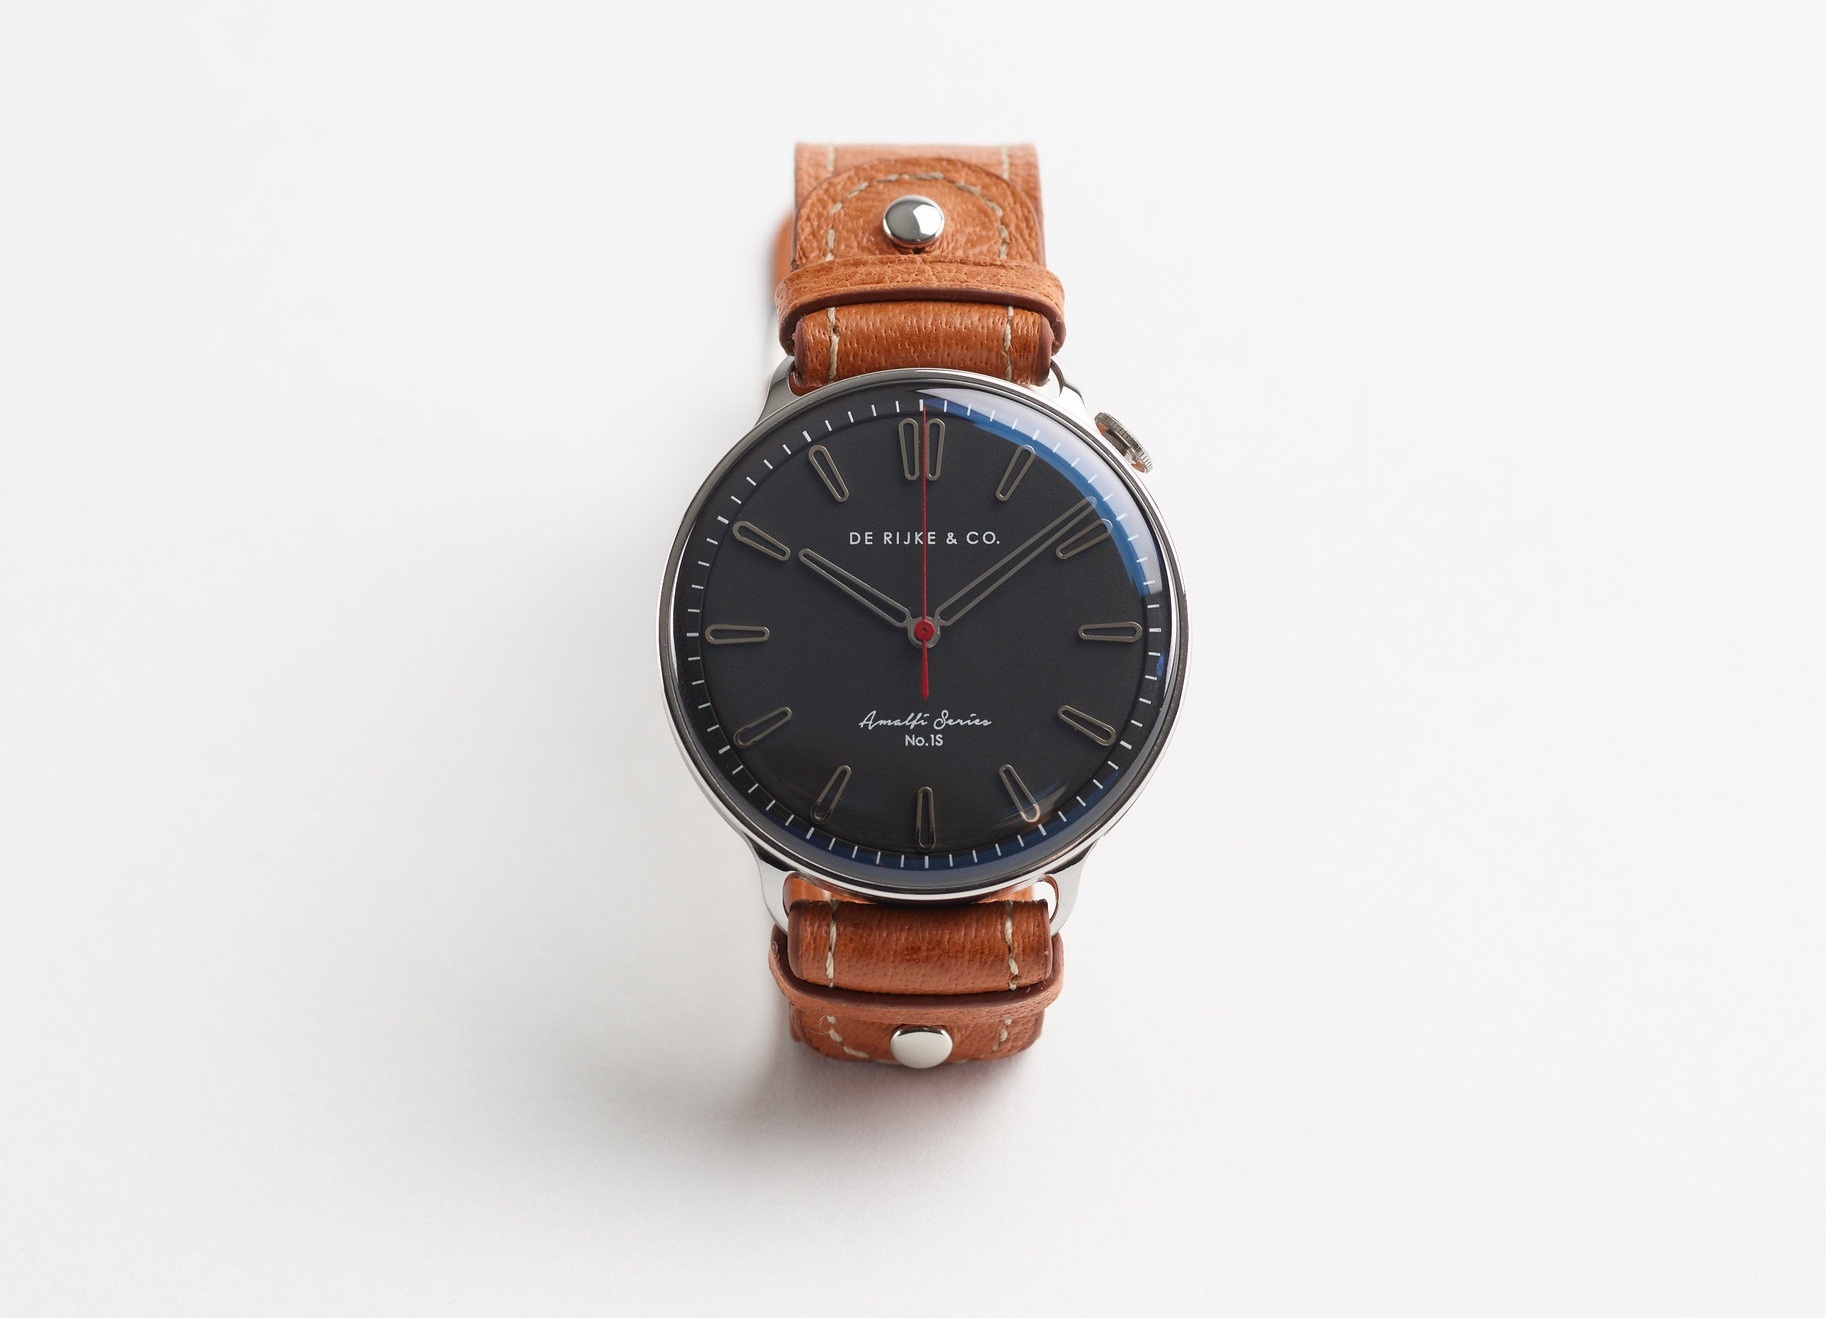 Introducing the De Rijke & Co. Amalfi Series 1S, a Watch for the Open Road